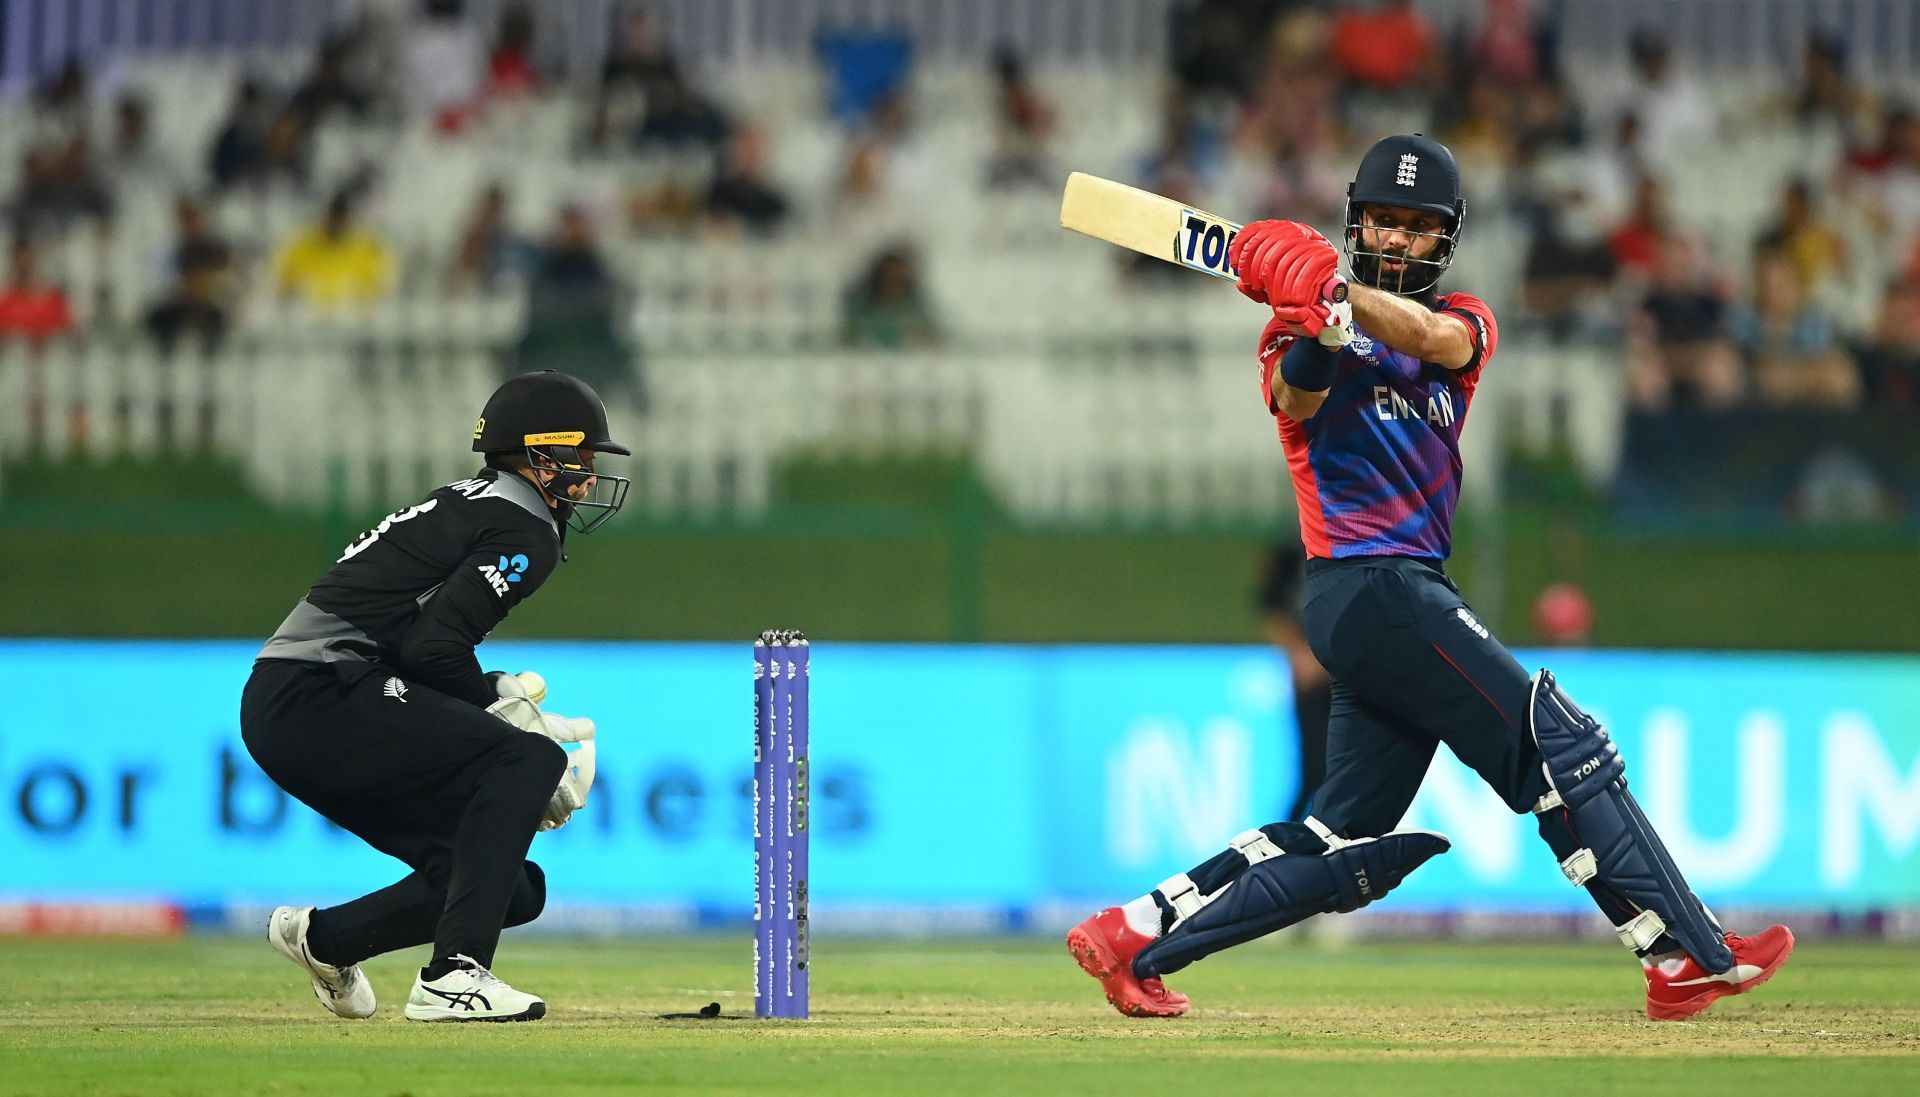 Moeen Ali had an impressive tournament with both bat and ball.